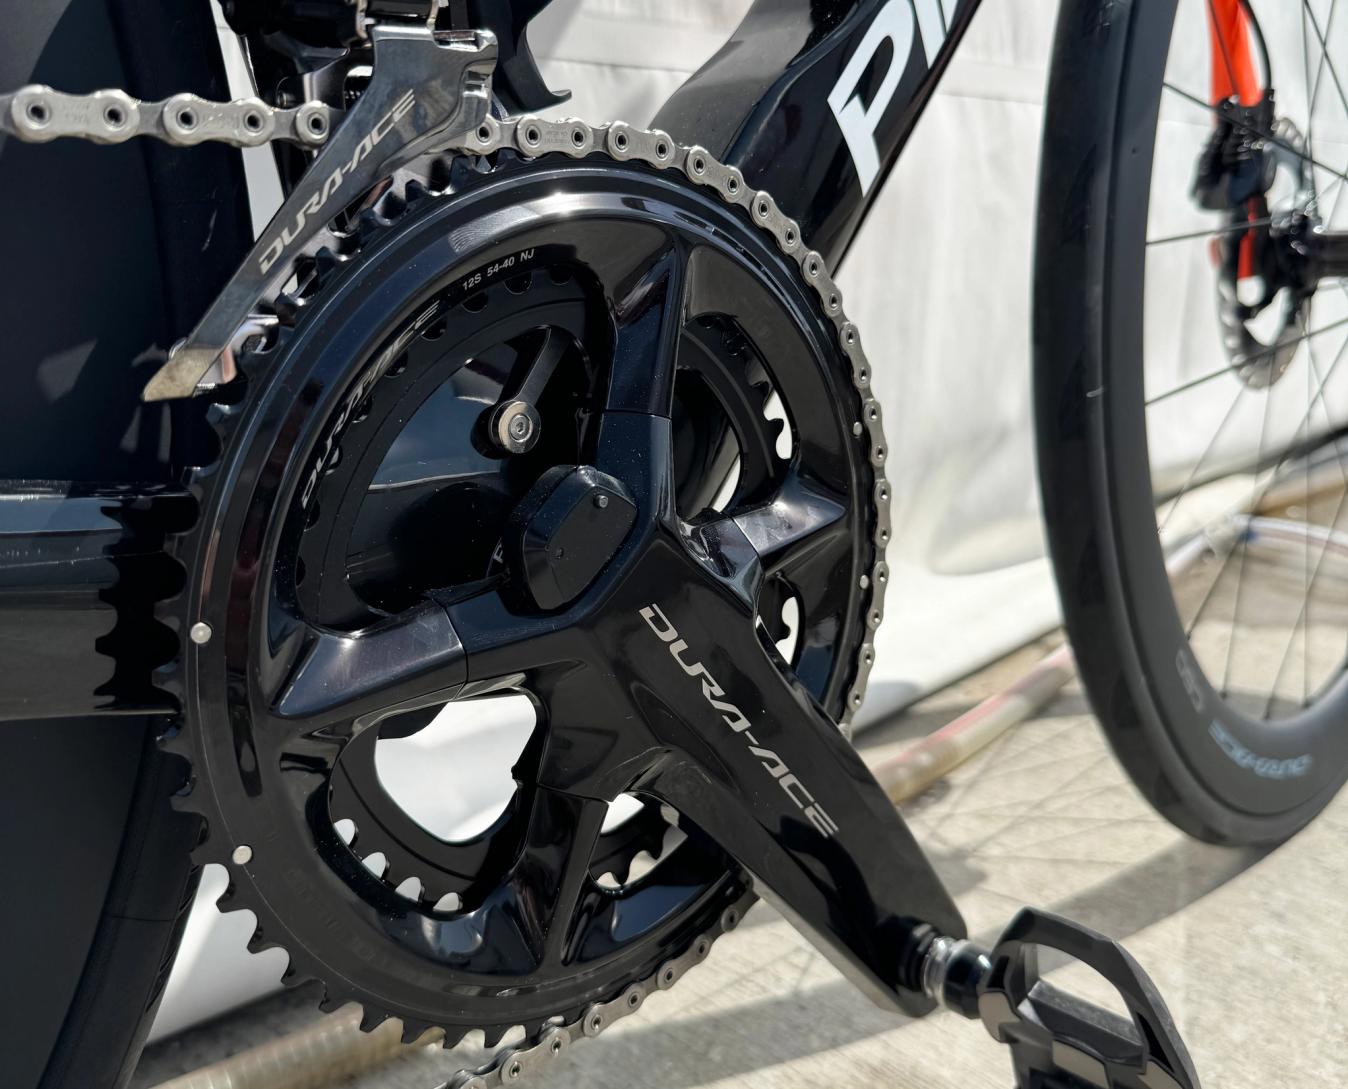 Foss' chainring set-up was a more standard 54/40t